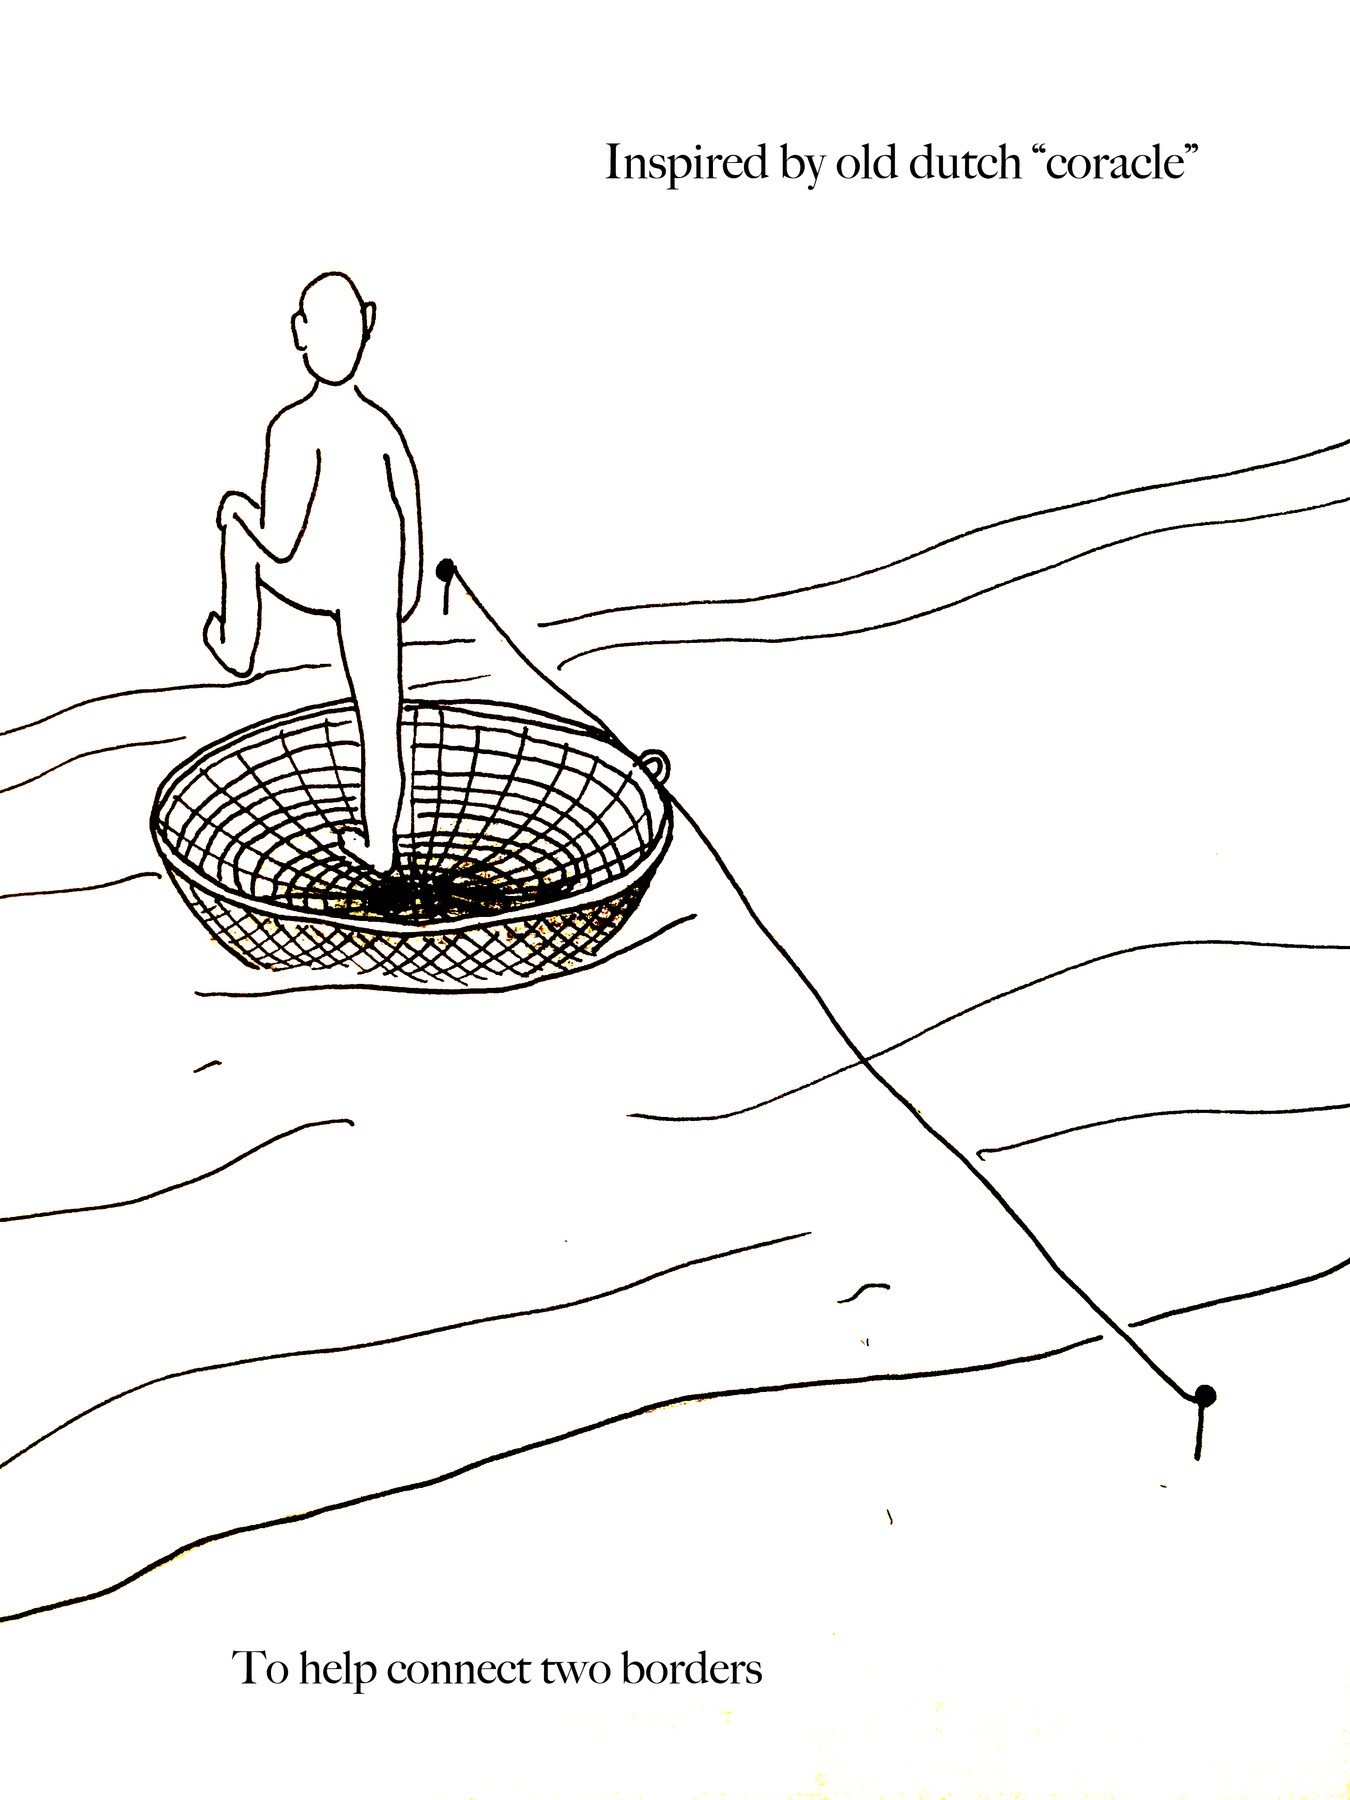 roudn-boat-coracle.png